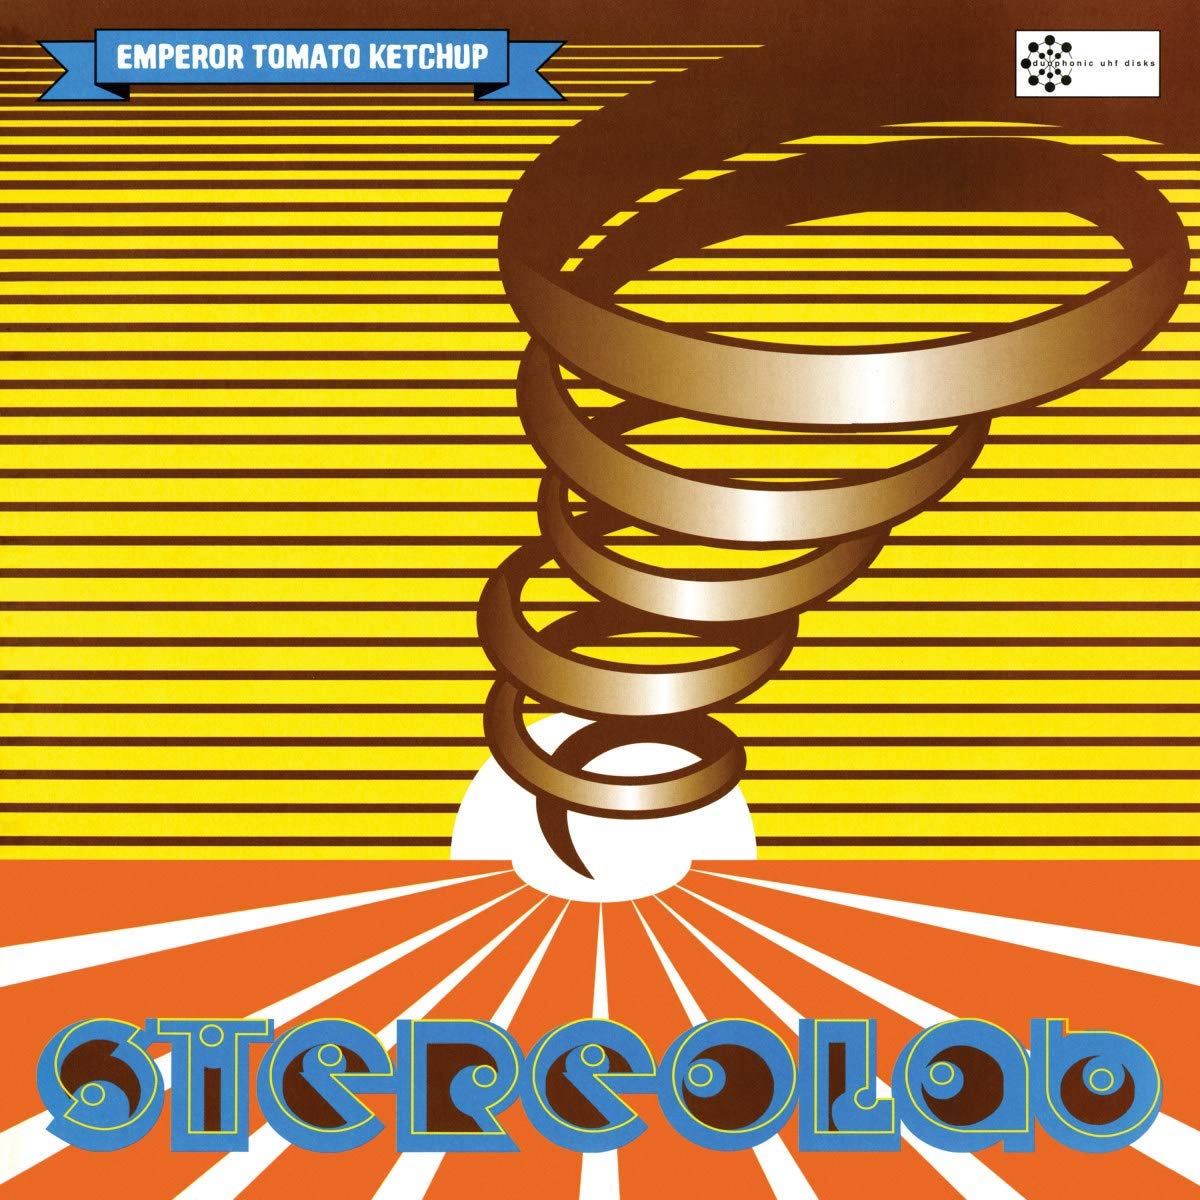 Cover von Stereolabs „Emperor Tomato Ketchup“